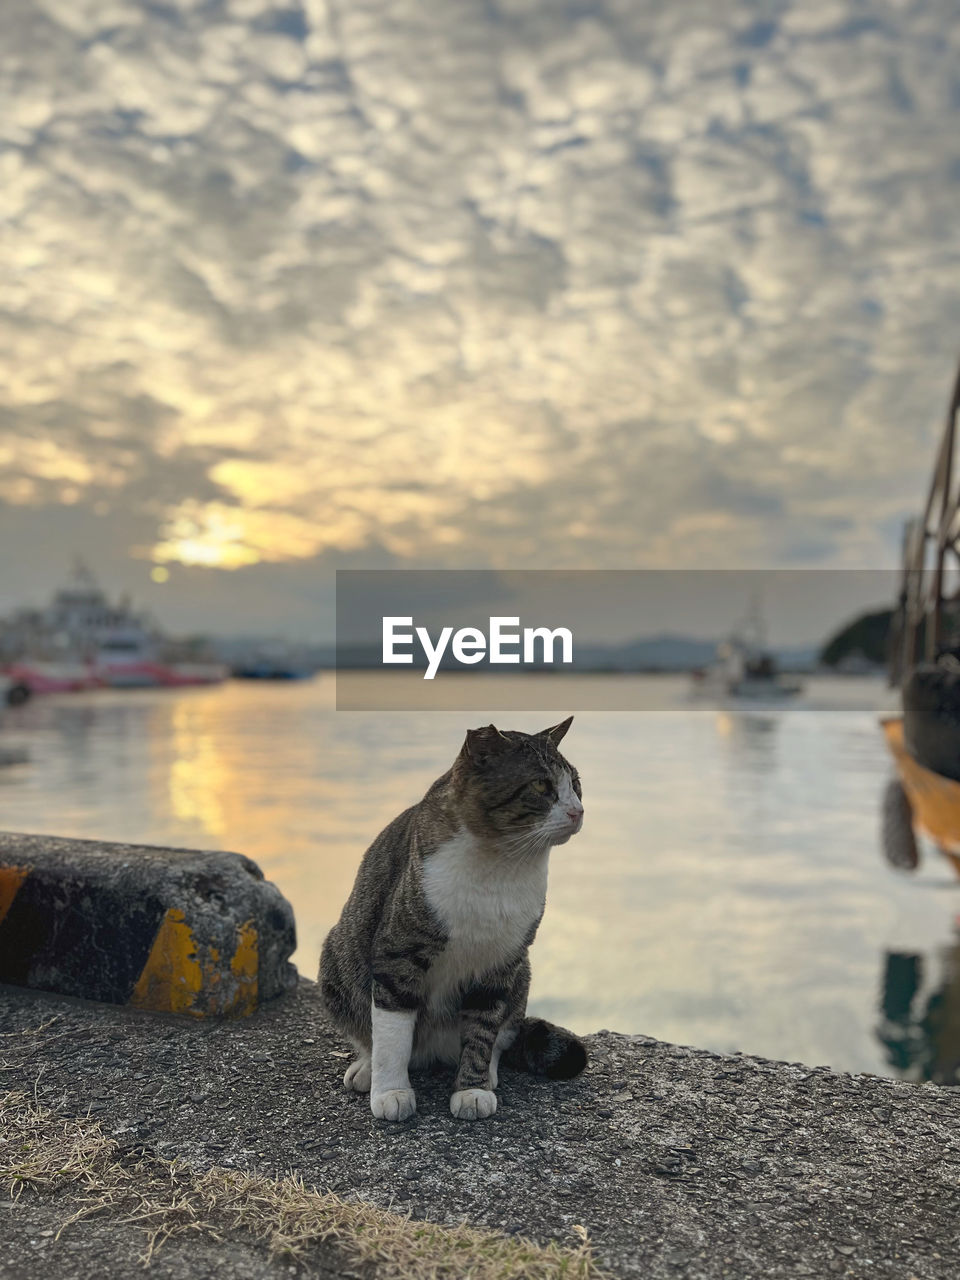 animal themes, animal, cat, one animal, mammal, water, sea, pet, sky, domestic animals, morning, nature, cloud, no people, nautical vessel, transportation, sitting, reflection, ship, dog, canine, feline, carnivore, beach, vehicle, outdoors, focus on foreground, wildlife, day, looking